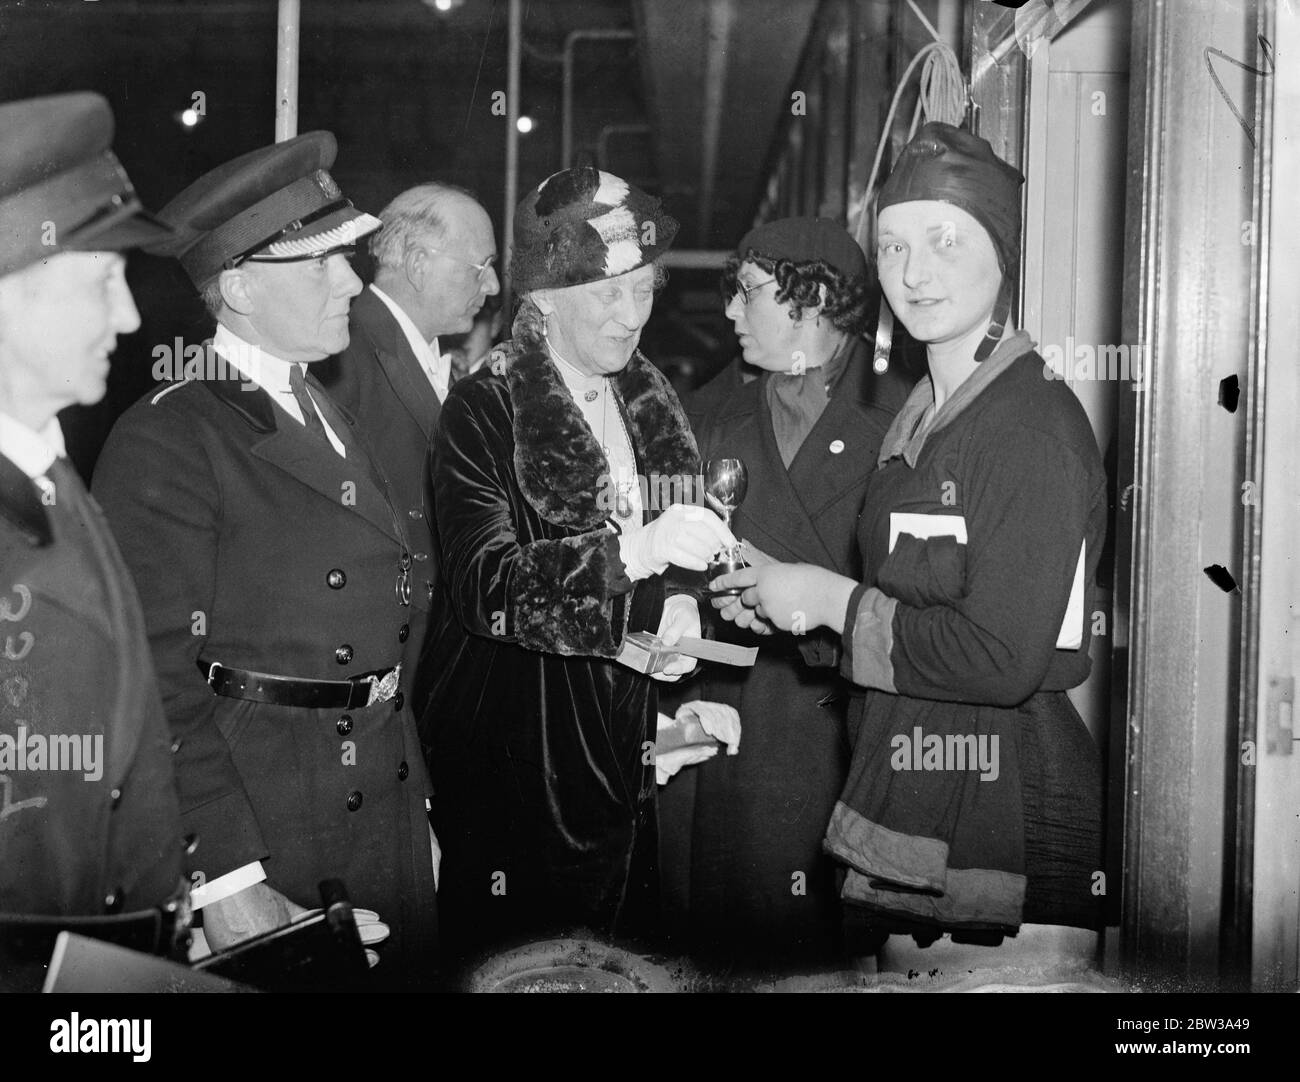 Women ' s reserve hold swimming gala . The women ' s reserve , the recently formed women ' s force under the command of Commandant Mary Allen , held a swimming gala at the Great Smith Street baths , London . Photo shows , Lady Bertha Dawkins presenting a cup to Miss E Pascall , winner of the Ladies open 100 yards handicaps , on the left is Commandant Mary Allen , O B E . 20 April 1934 . Stock Photo